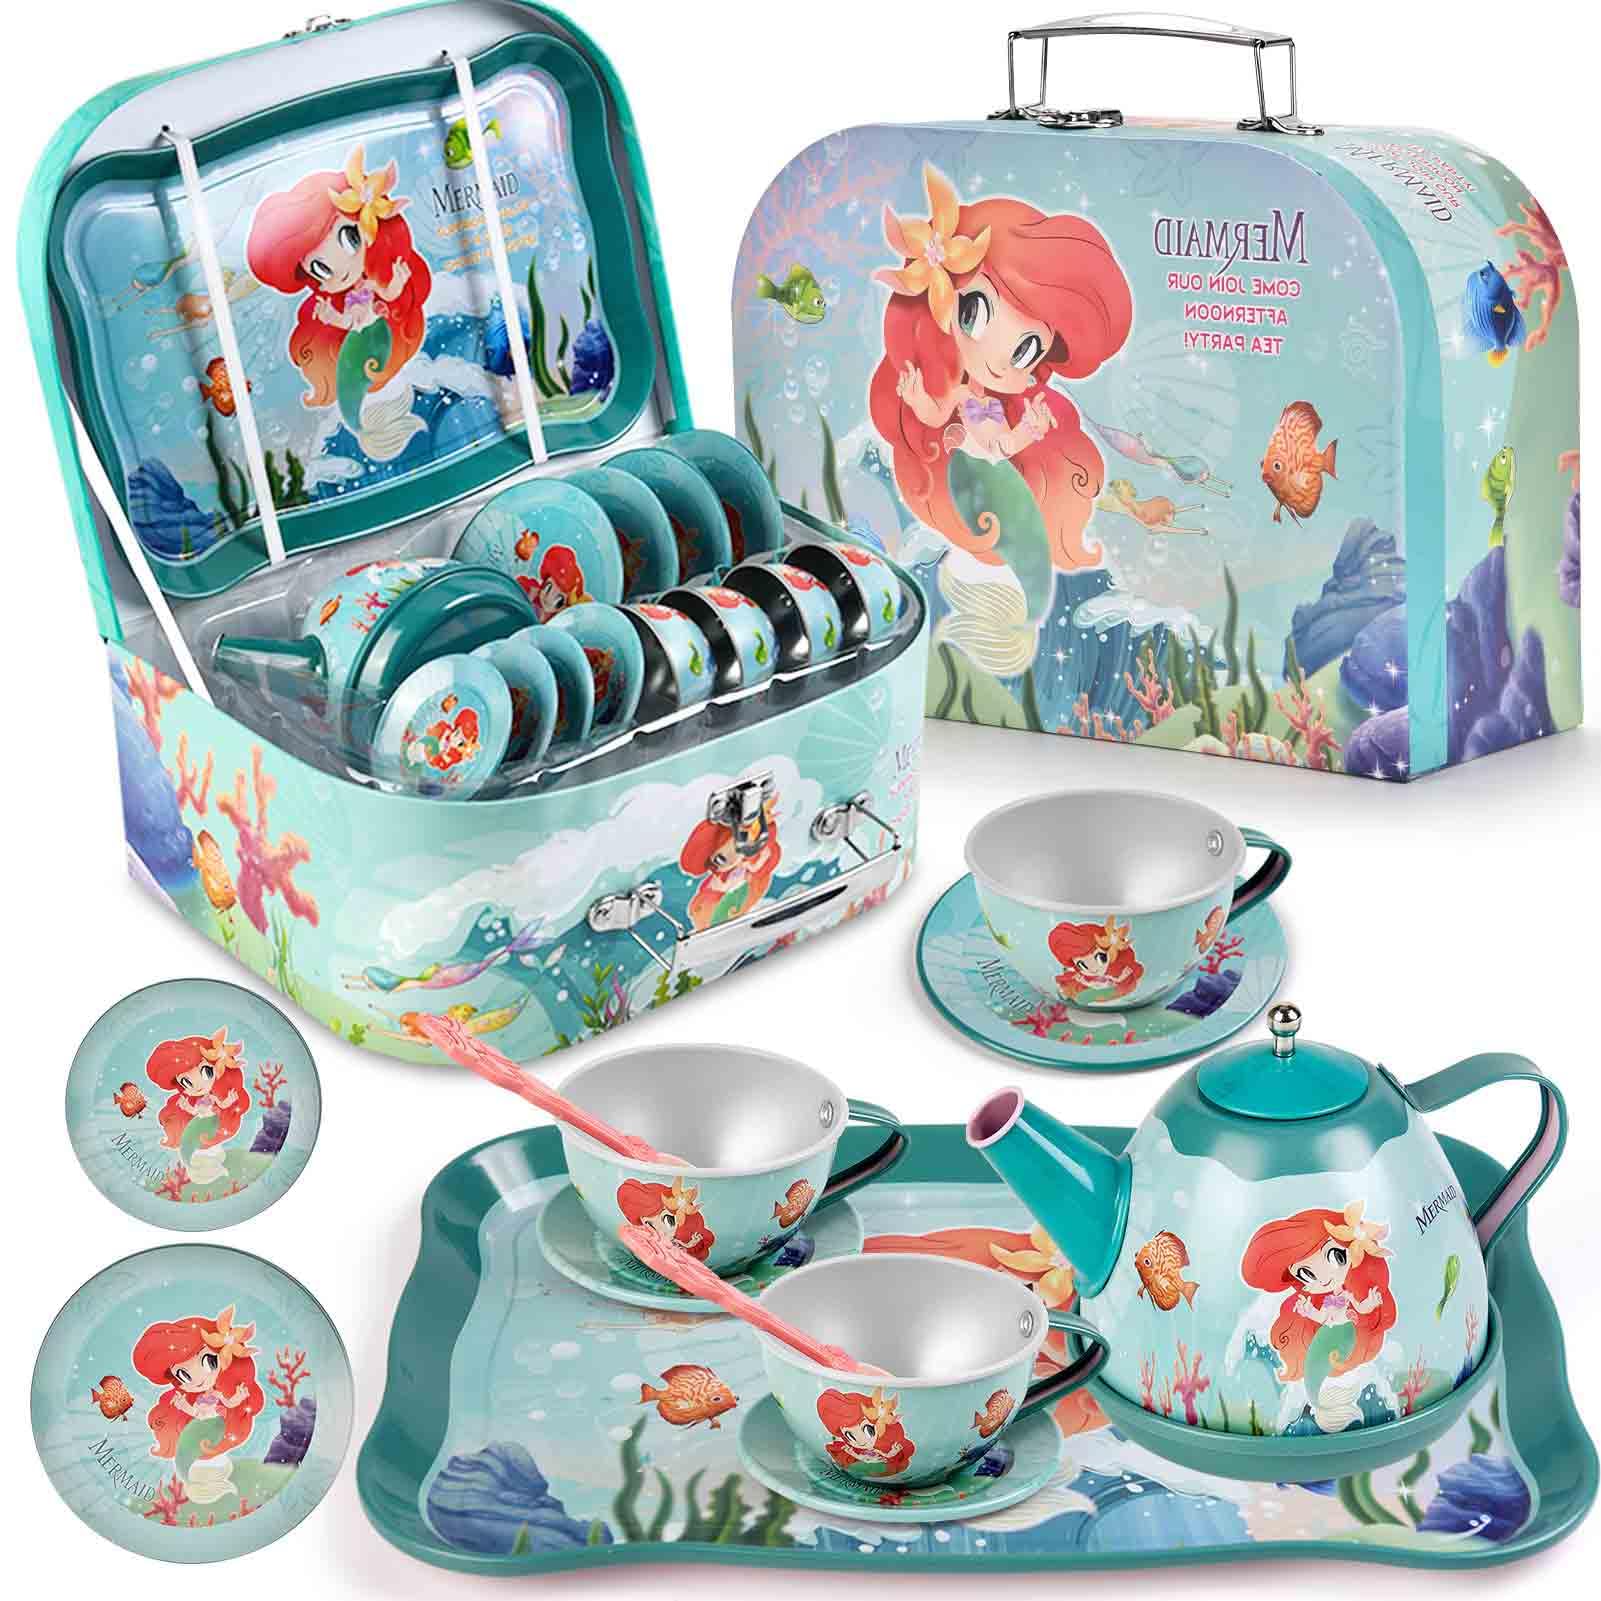 Lajeje Mermaid Tea Party Set for Little Girls, Kids Party Set Toys for 3 4 5 6 Year Old Girls, Pretend Toy Tin Tea Set & Carrying Case, Princess Tea Time Kitchen Play Toys, Birthday Gifts for Girls